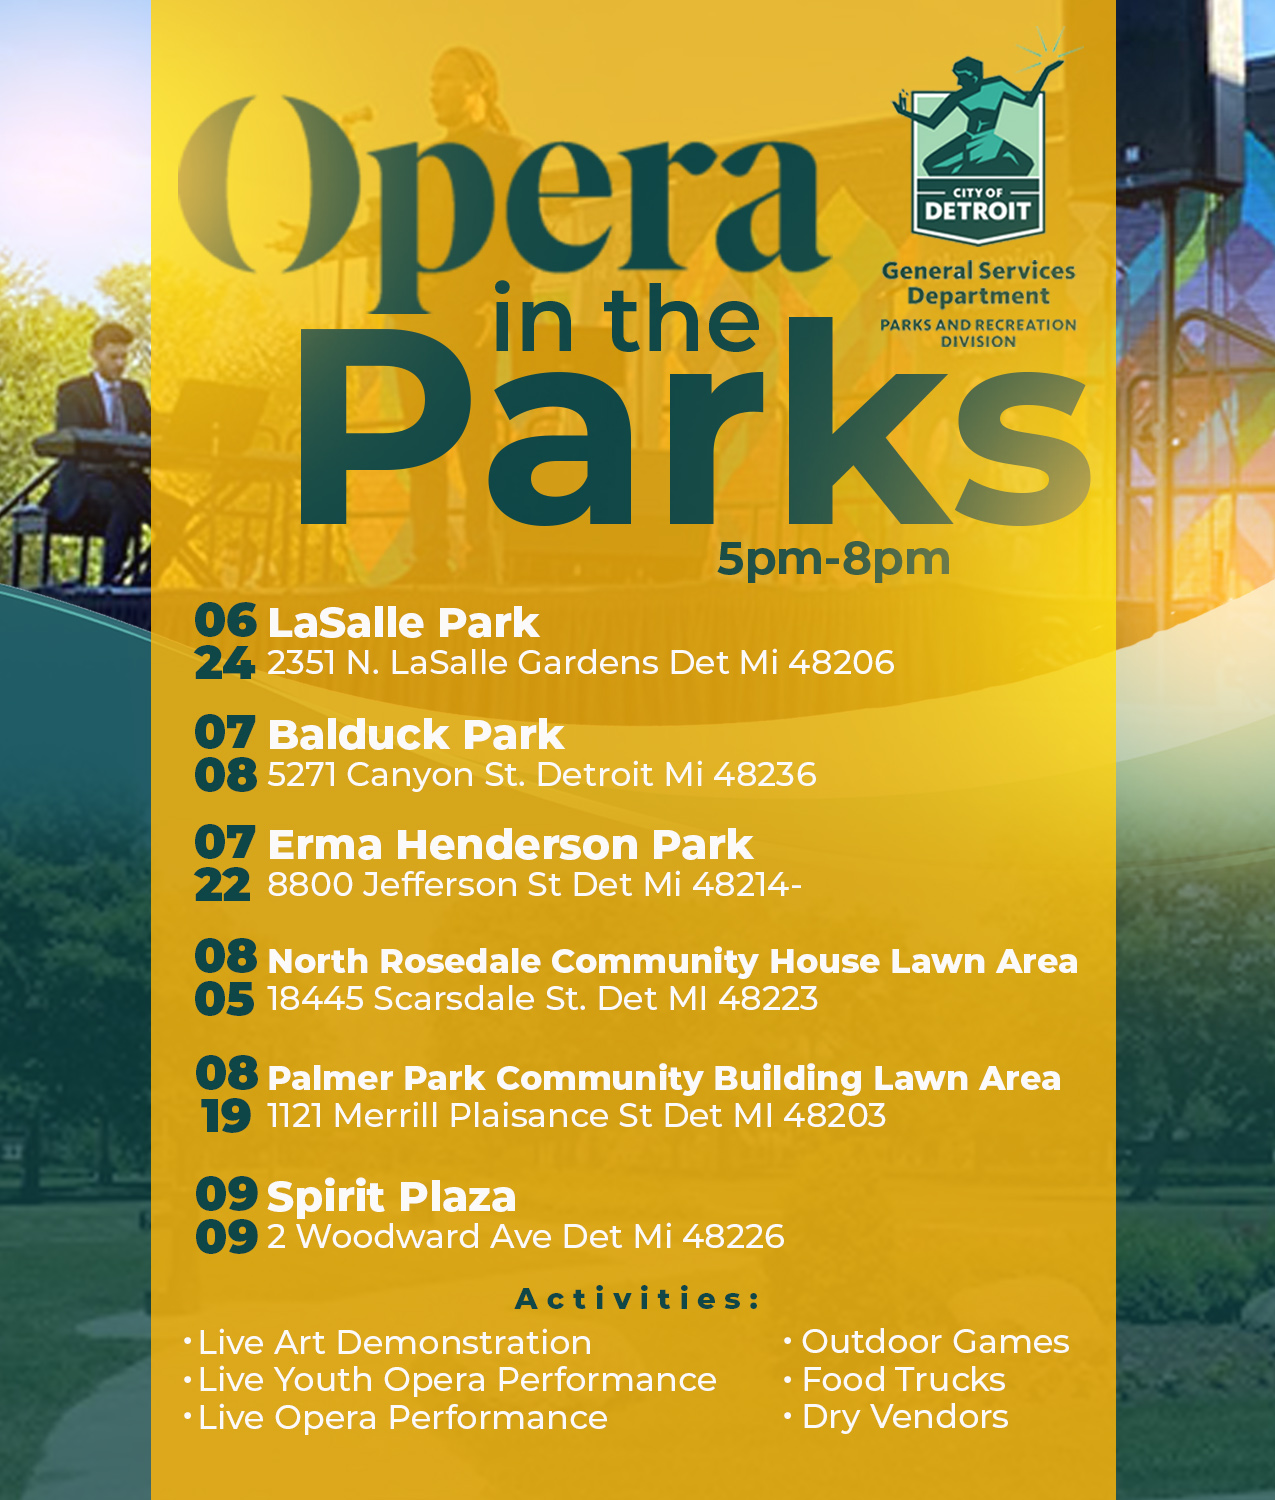 Take Part in Opera in the Parks